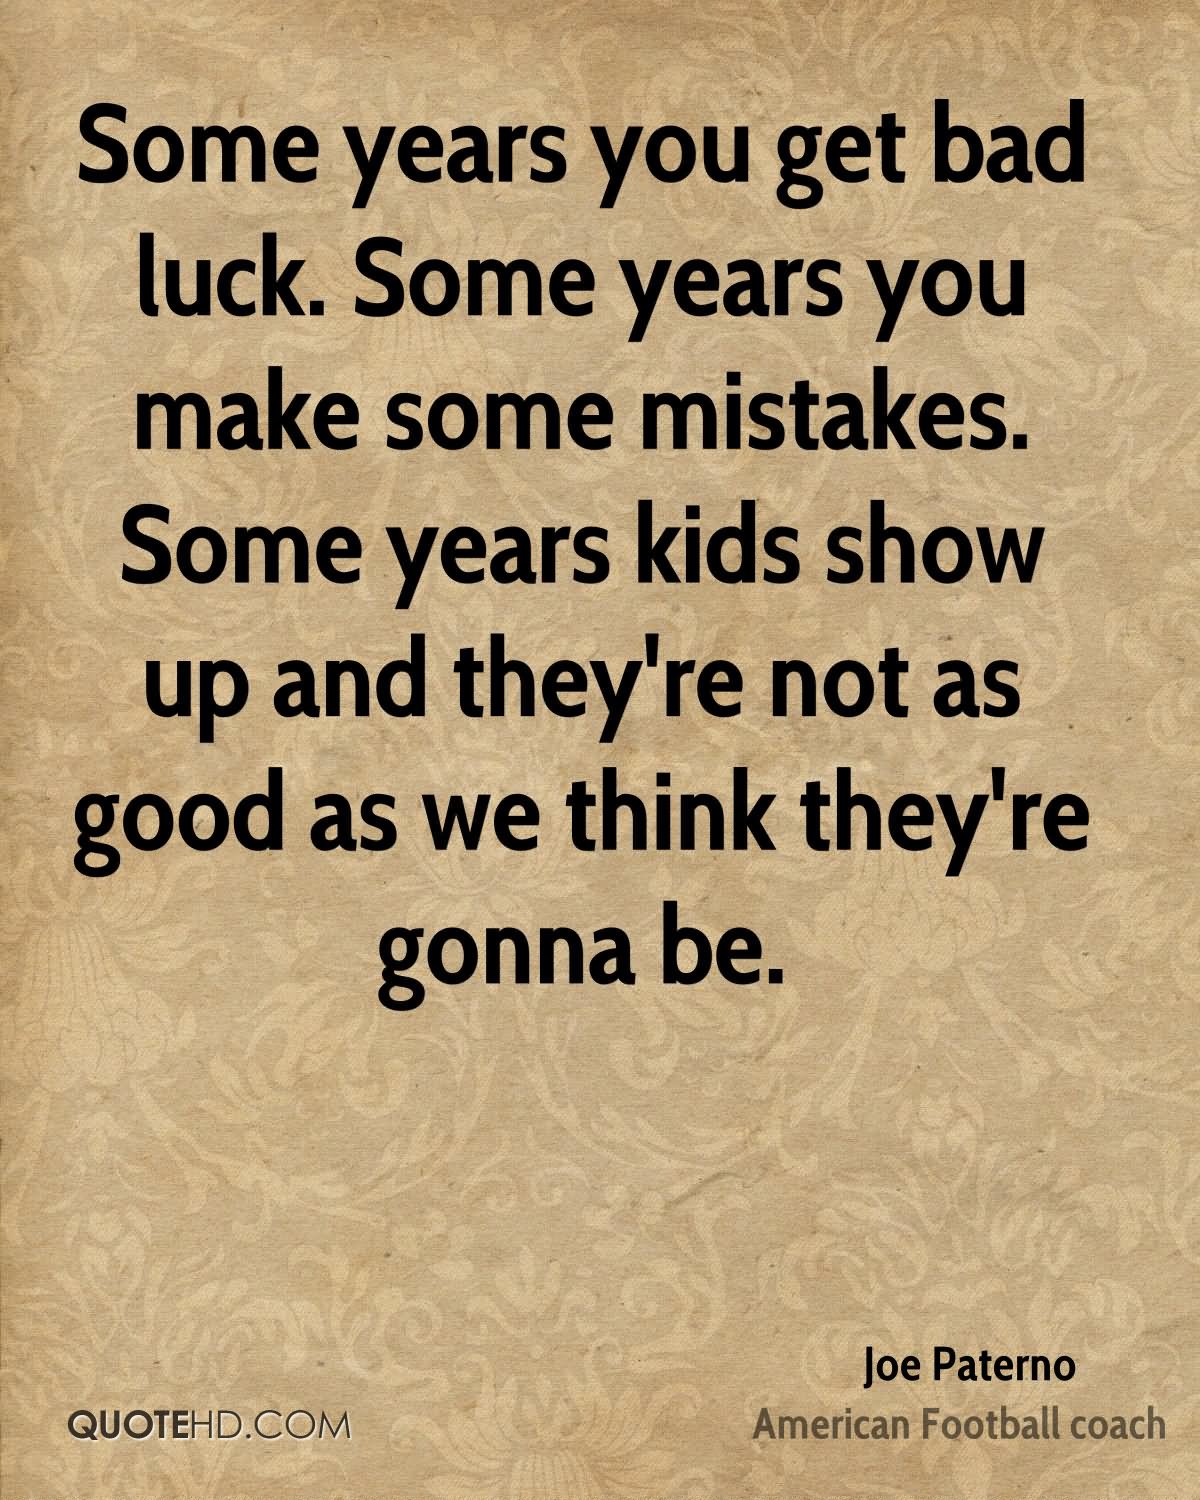 Some years you get bad luck. Some years you make some mistakes. Some years kids show up and they’re not as good as we think they’re gonna be.